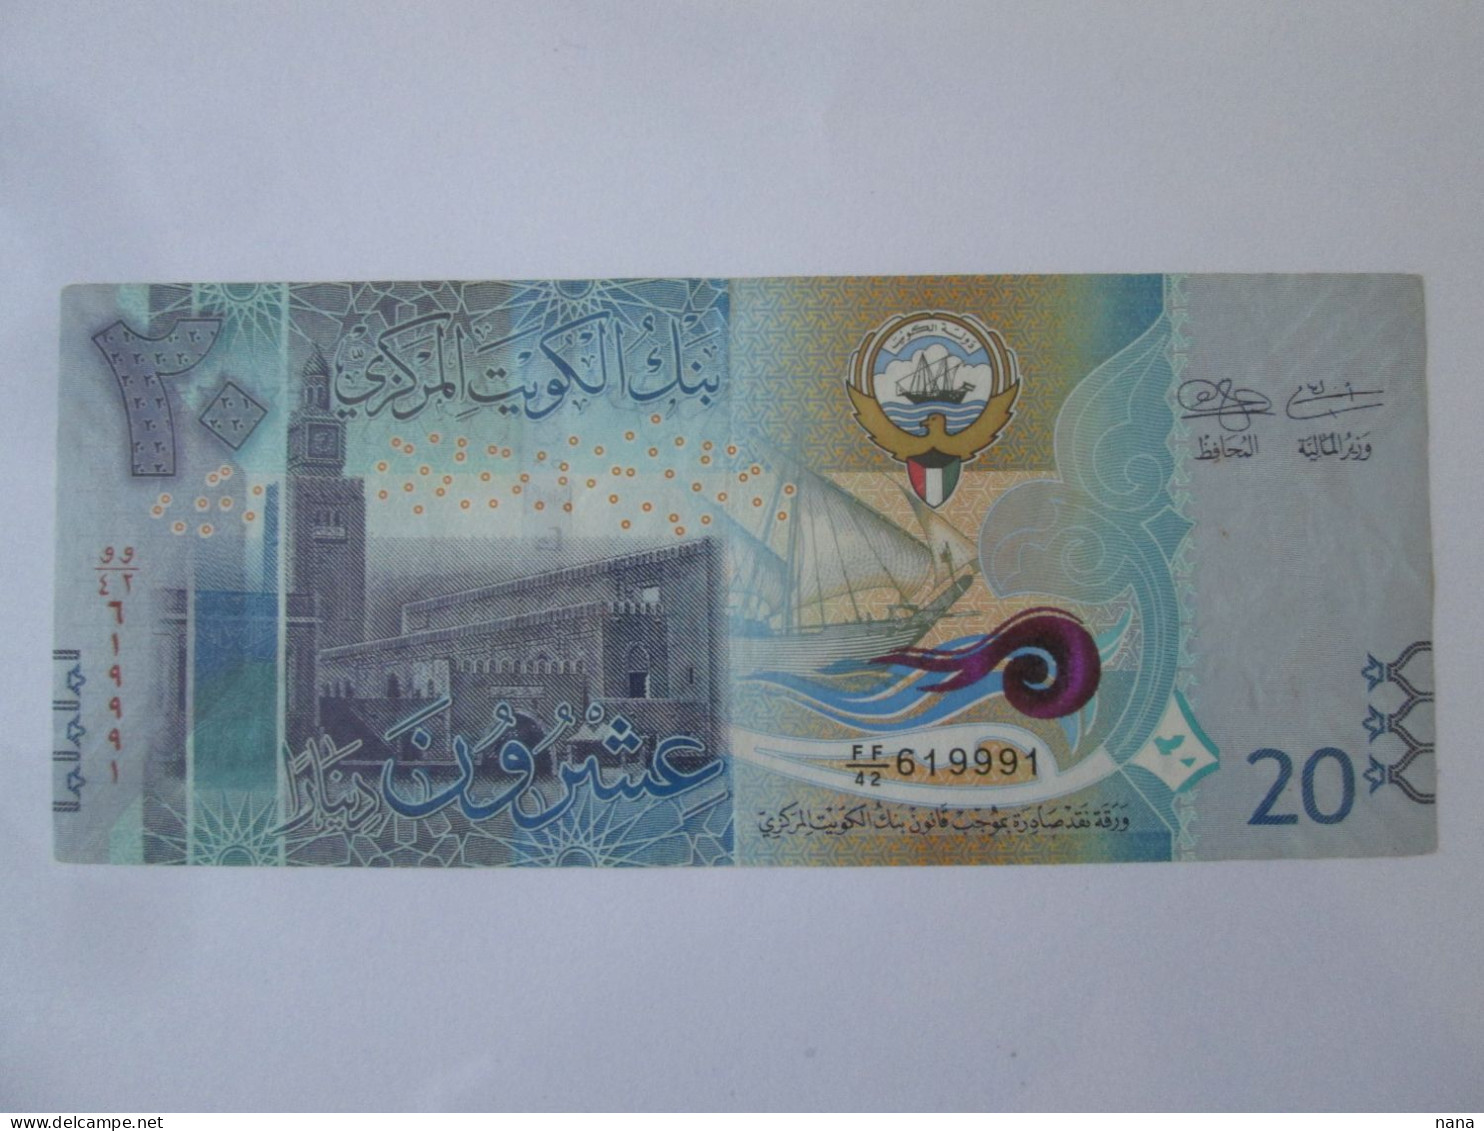 Rare! Kuwait 20 Dinars 2014 Banknote Serie 619991,see Pictures - Koweït